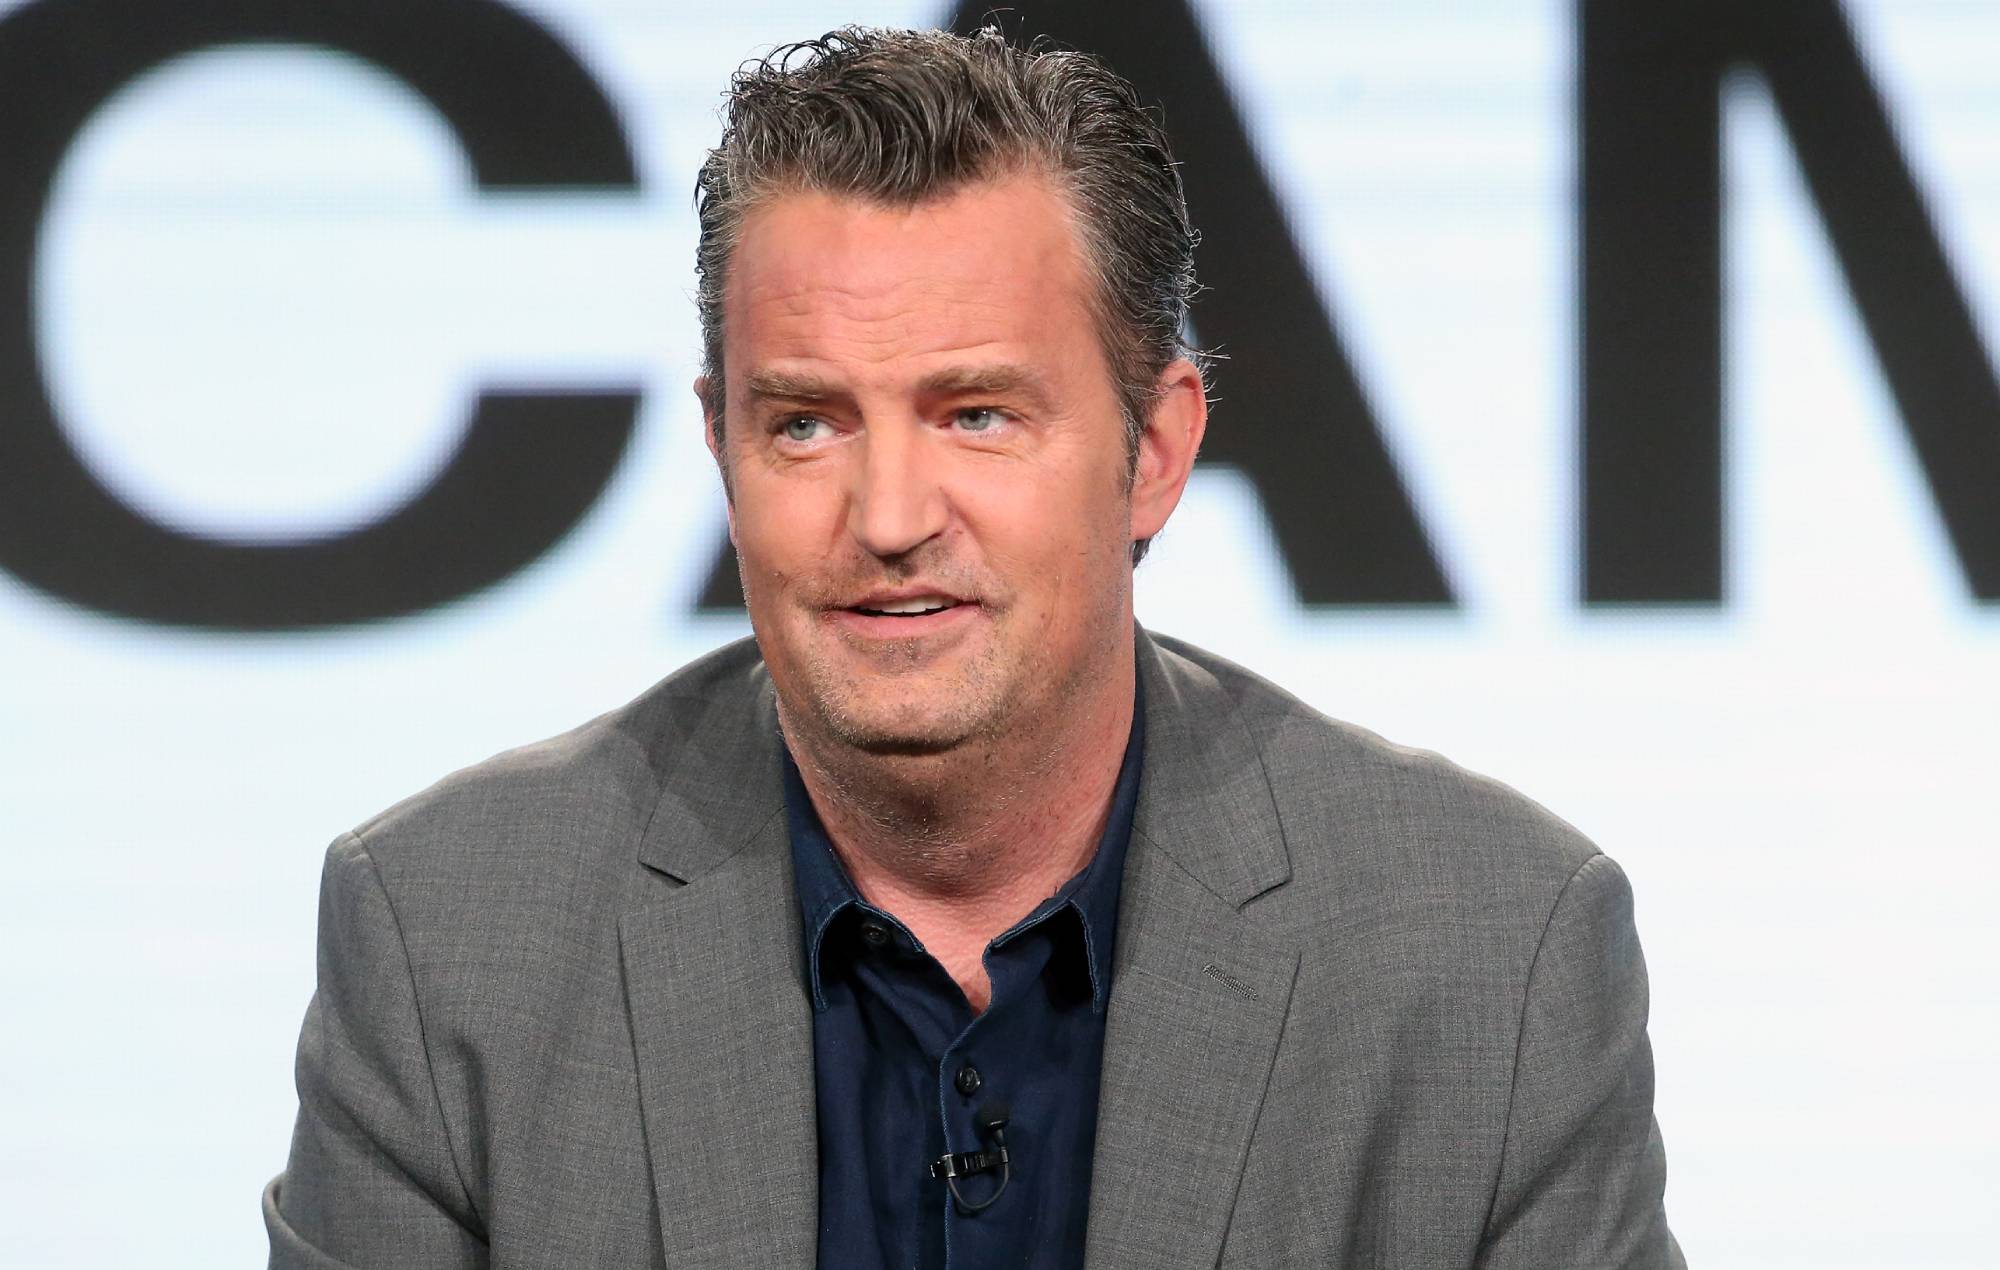 Matthew Perry’s words of advice in last interview: “People do change”